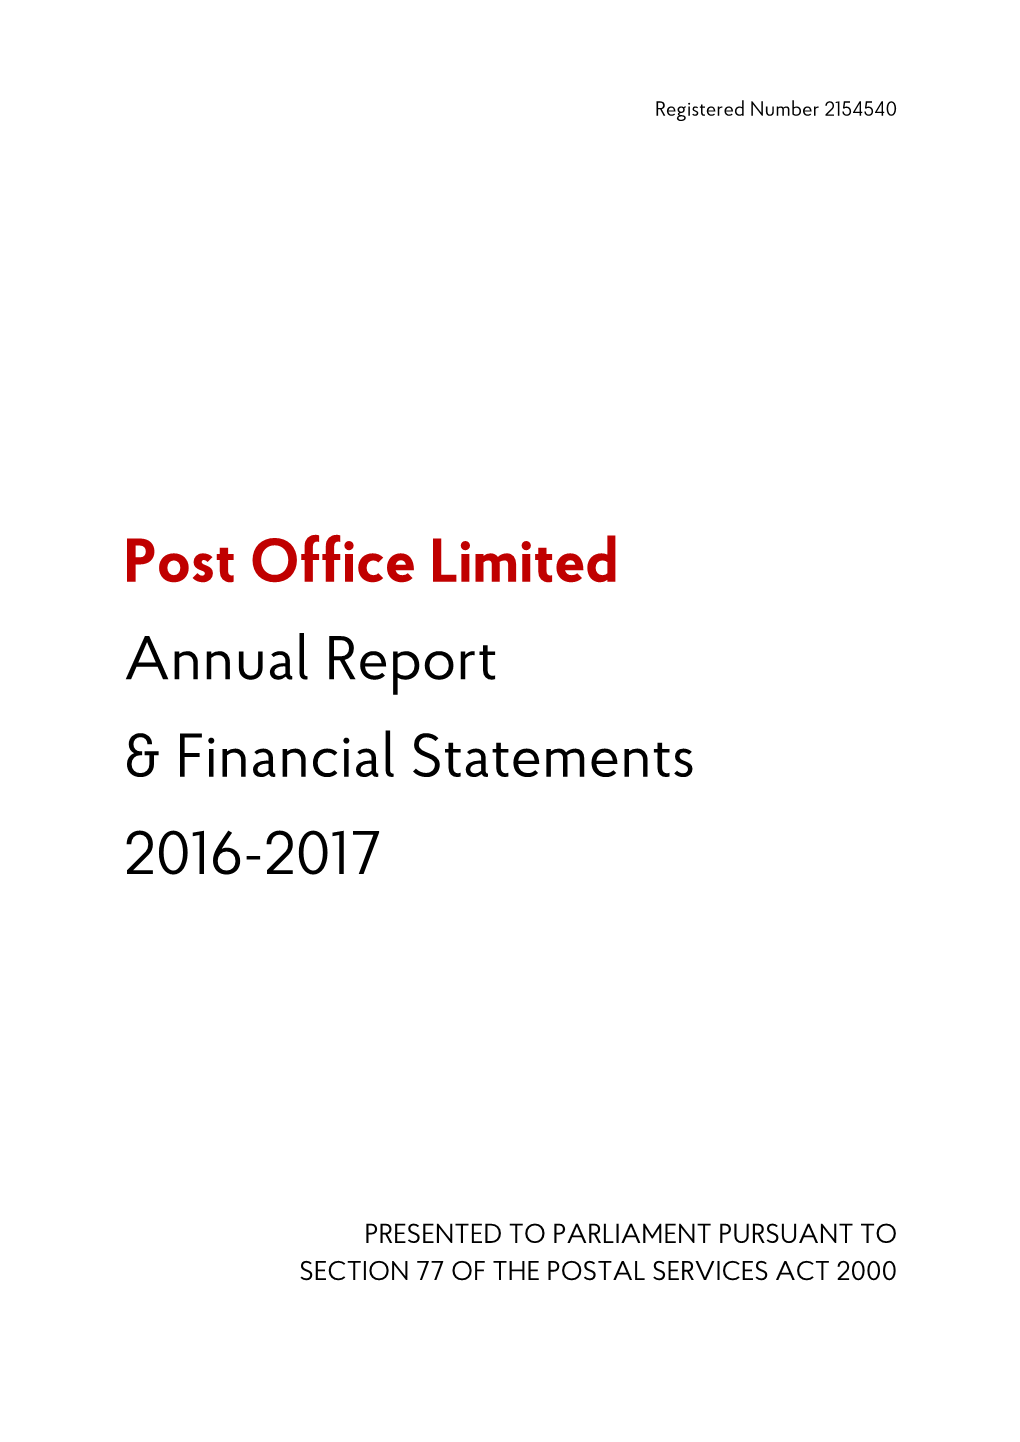 Post Office Limited Annual Report & Financial Statements 2016-2017